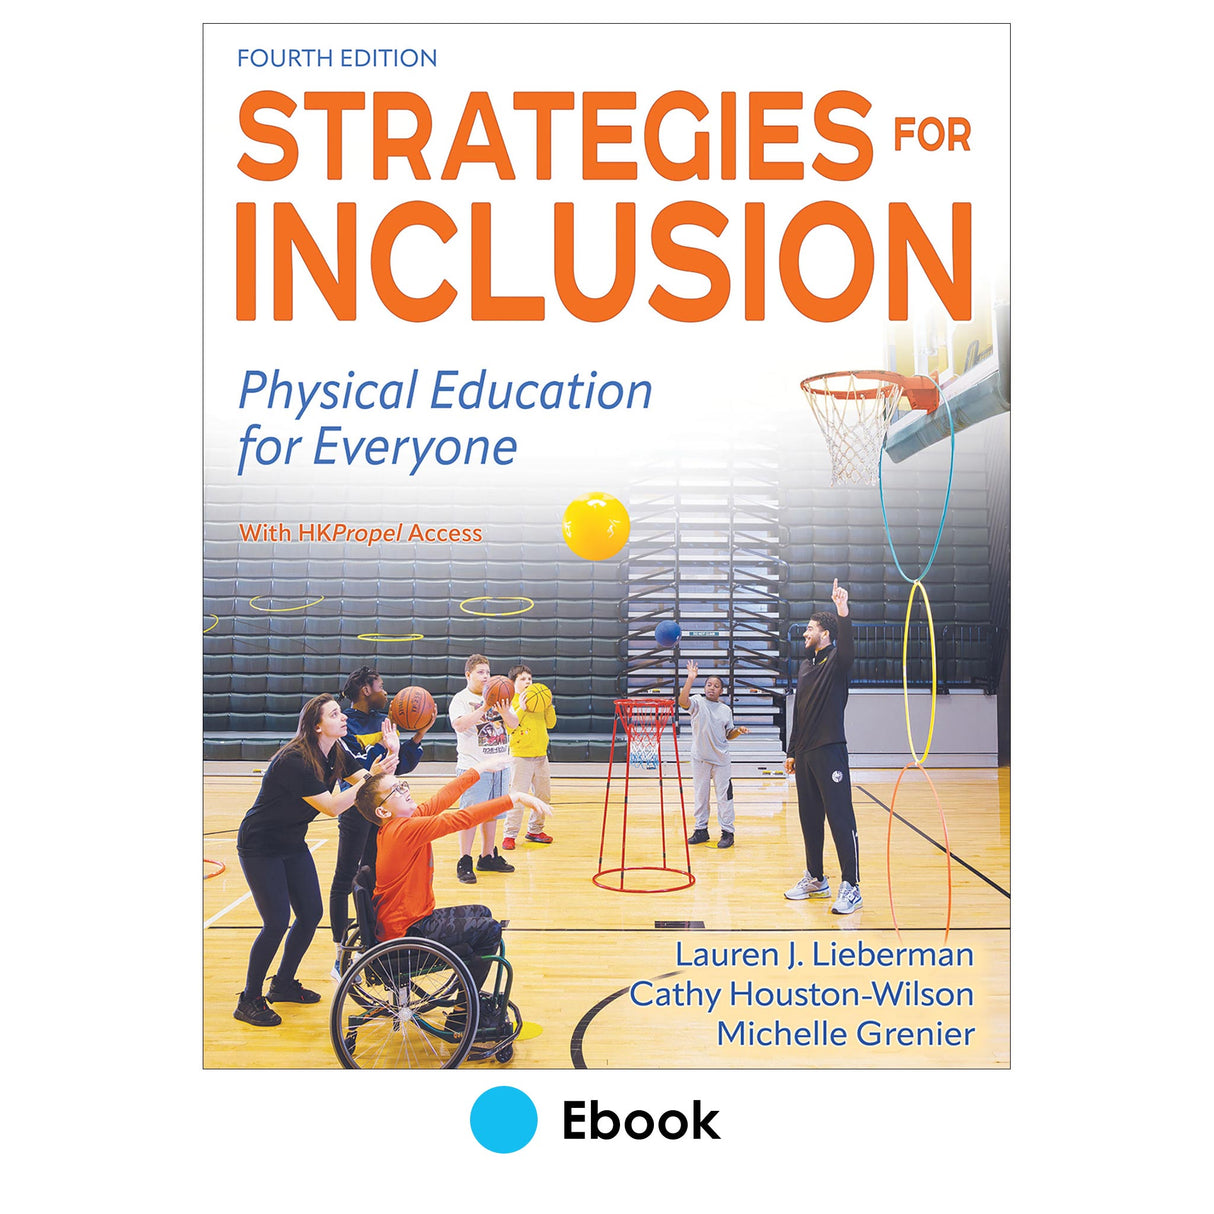 Strategies for Inclusion 4th Edition Ebook With HKPropel Access